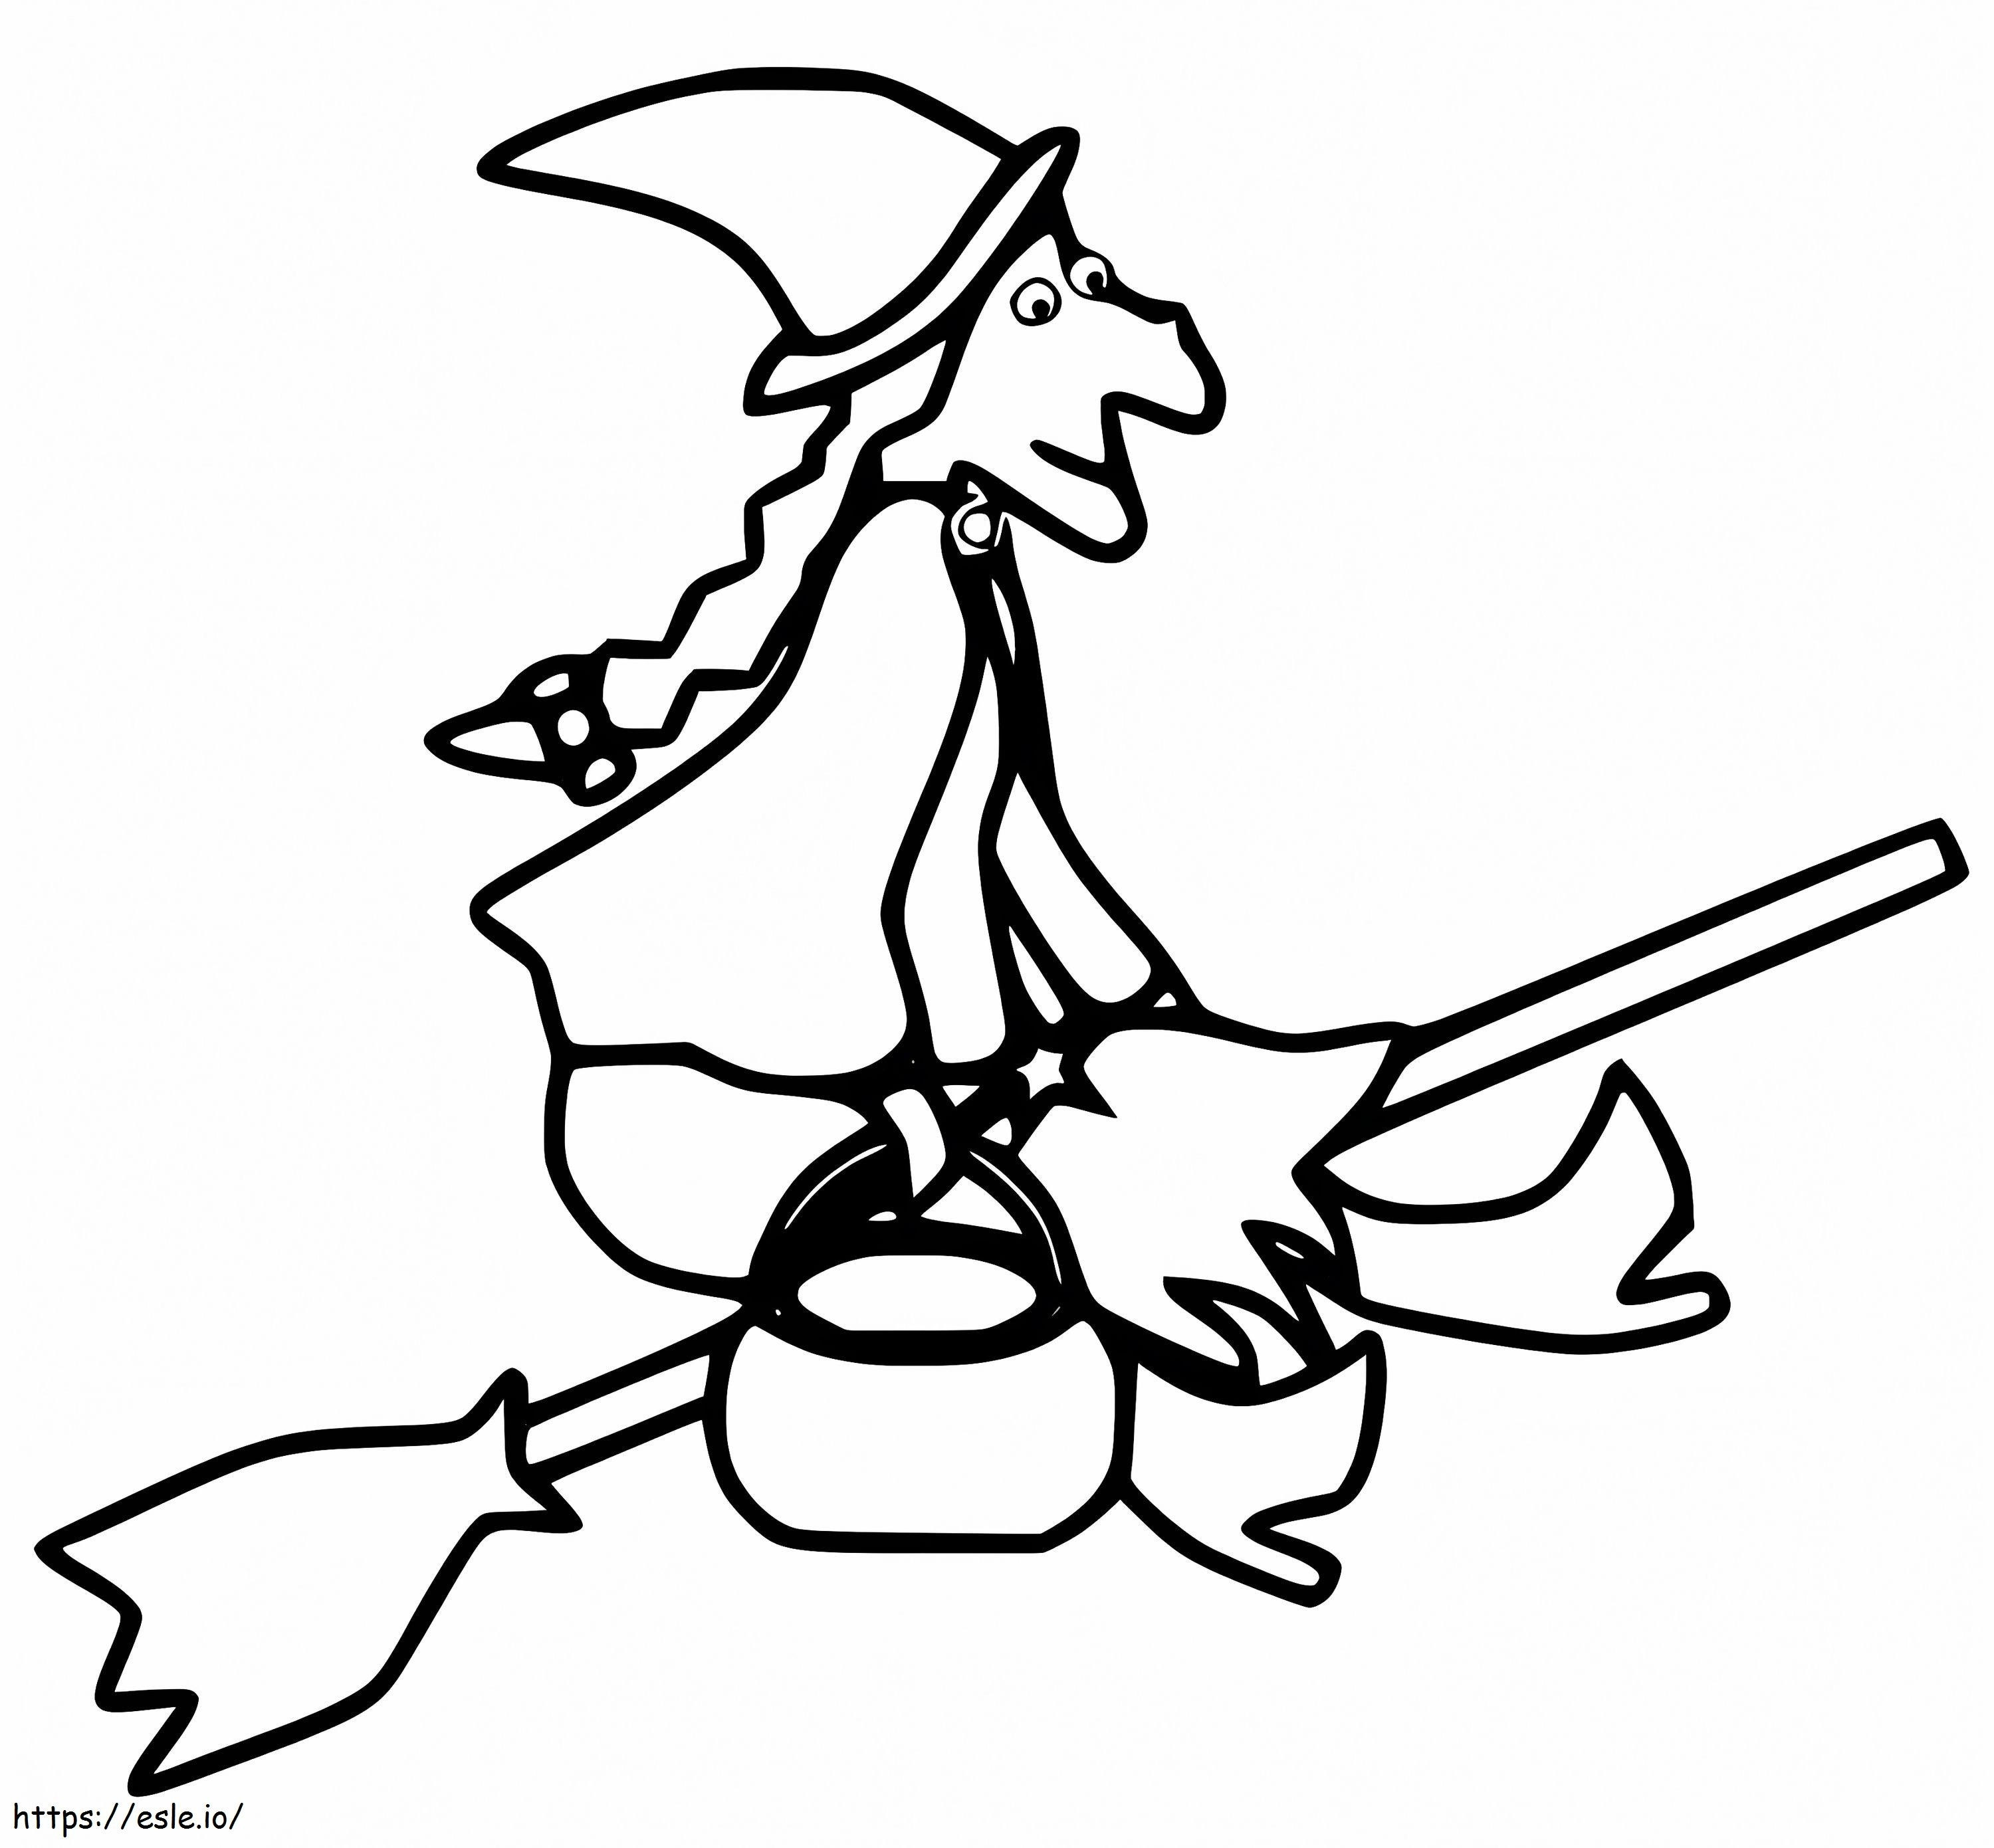 Room On The Broom 2 coloring page